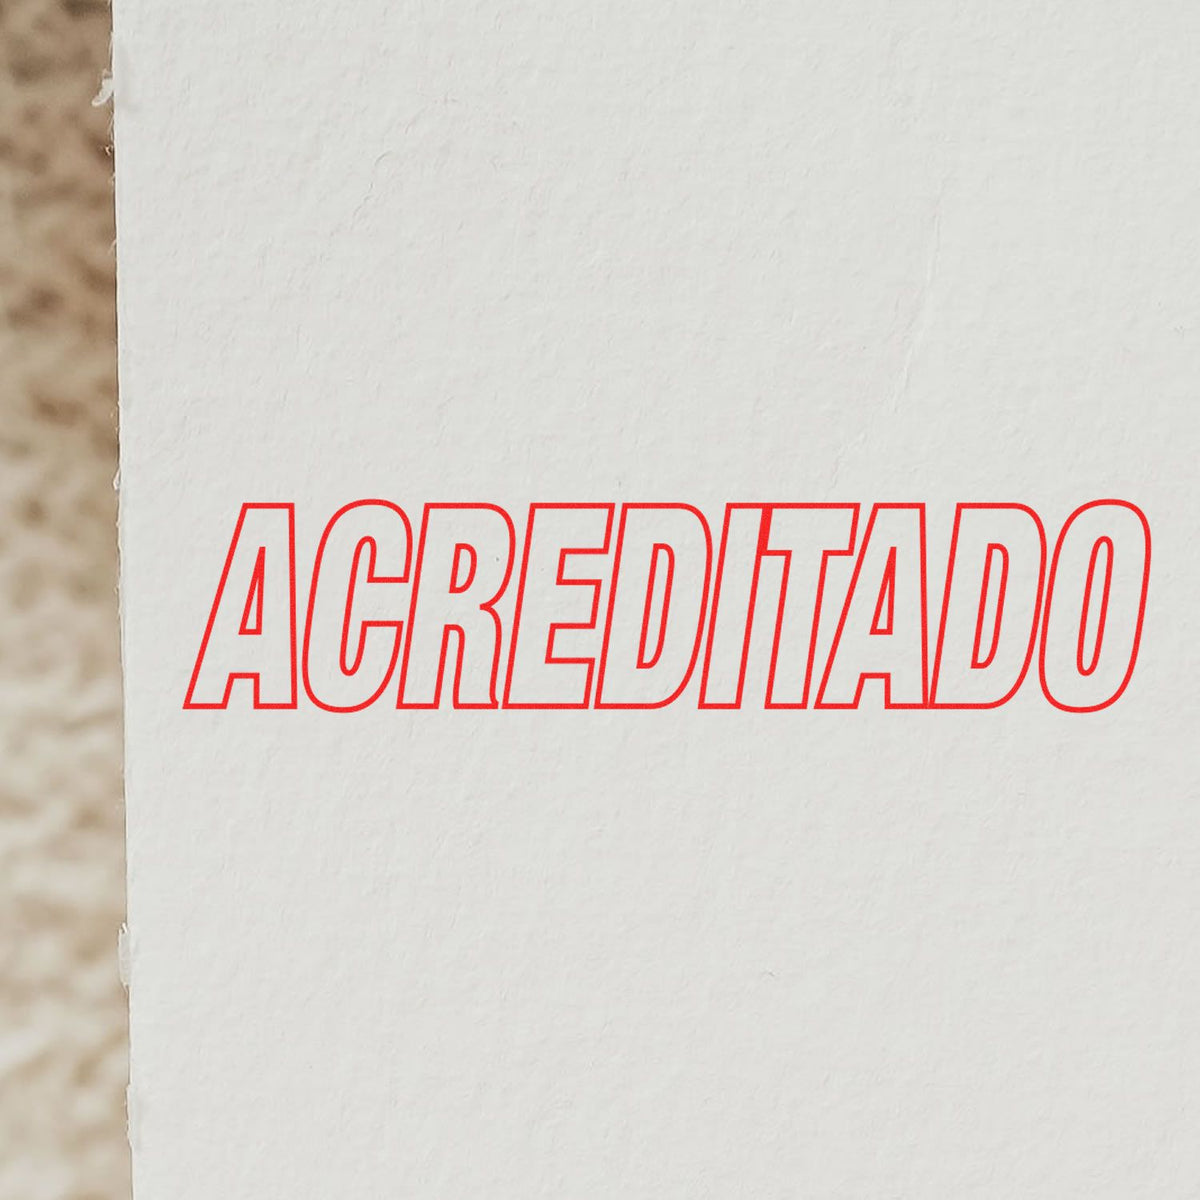 Acreditado Rubber Stamp In Use Photo